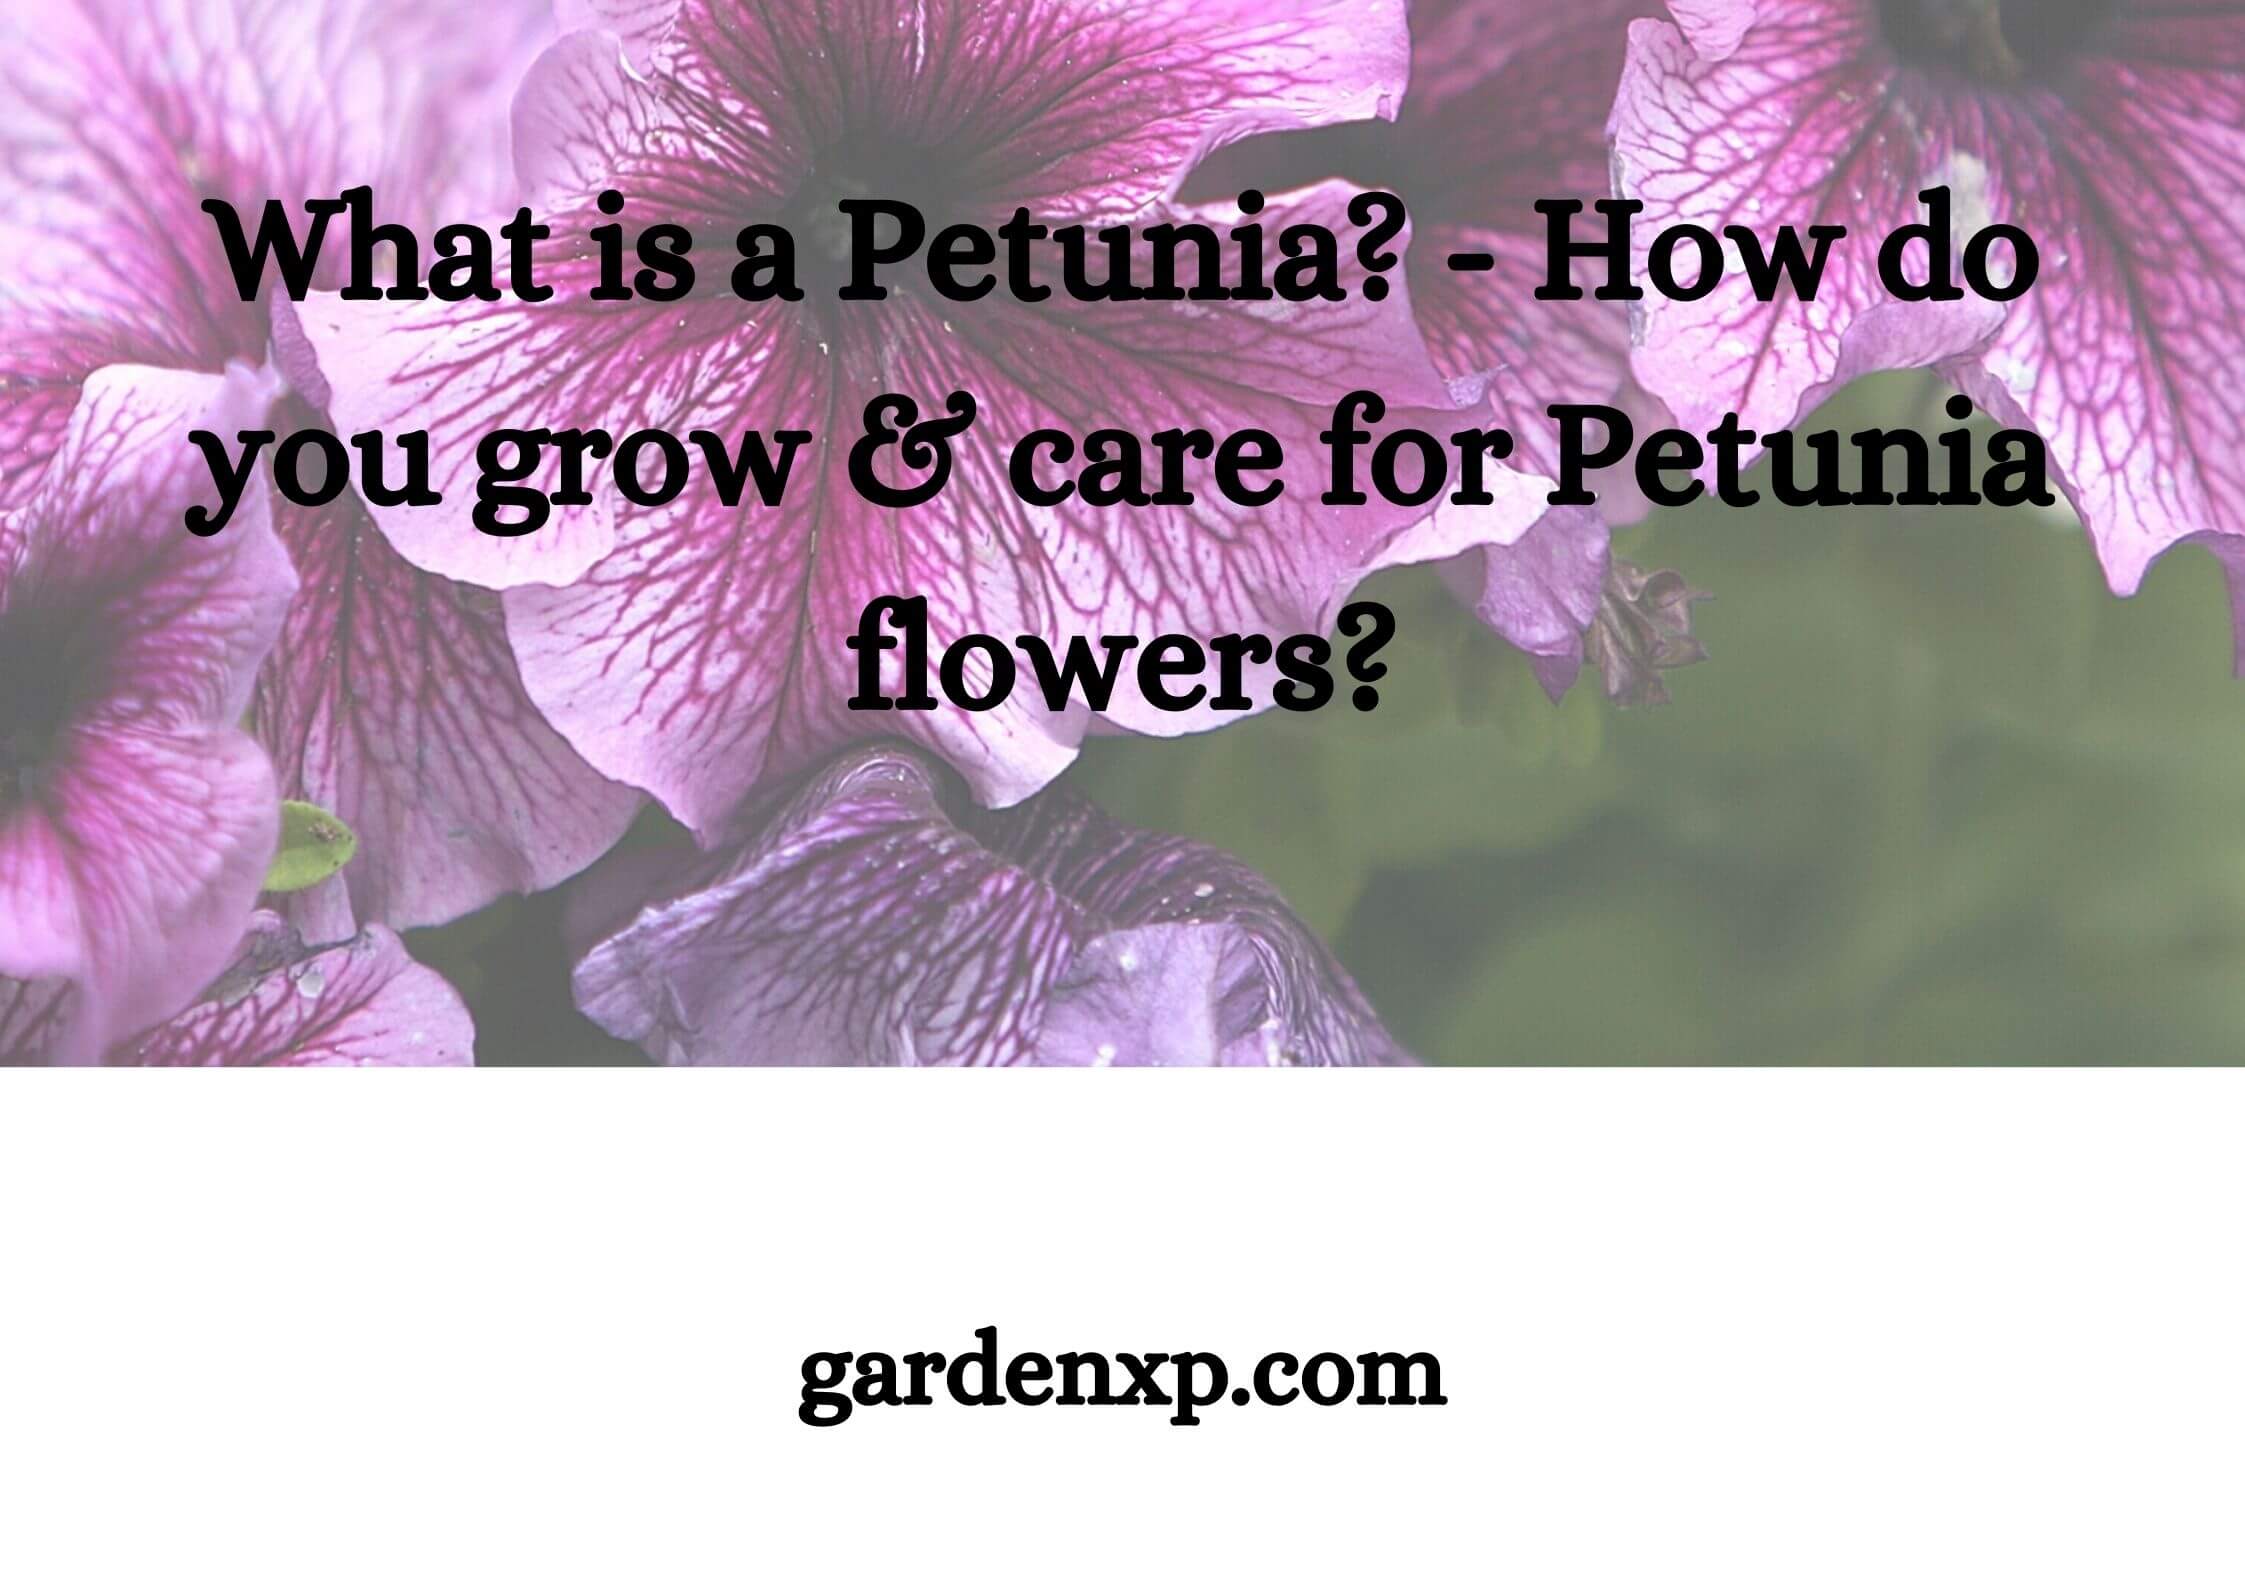 What is a Petunia? - How do you grow & care for Petunia flowers?